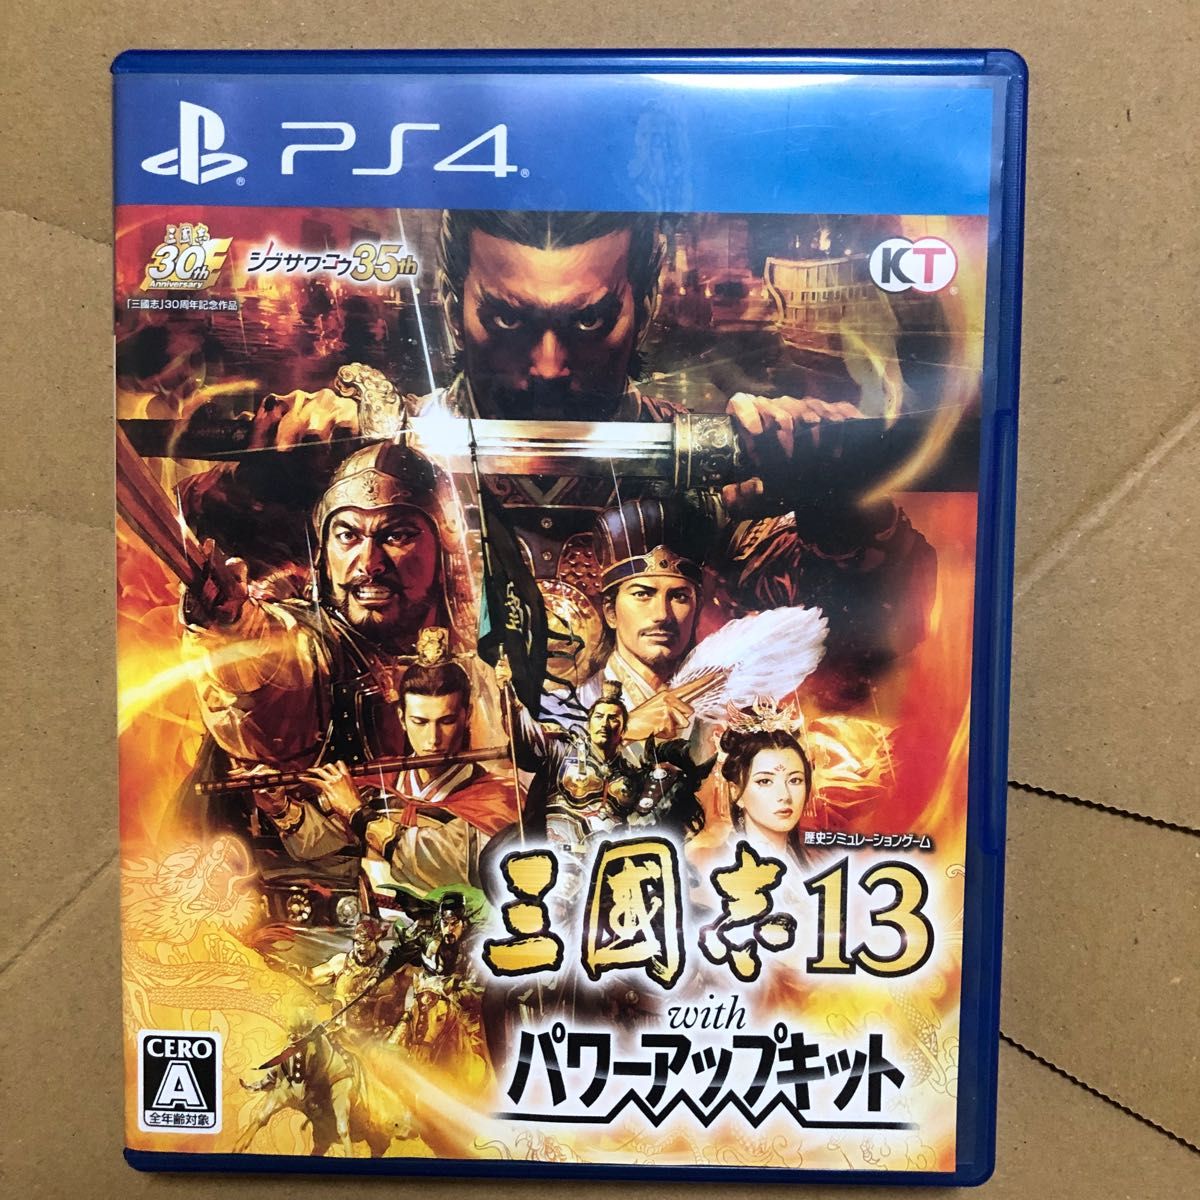 PS4 三國志１３withパワーアップキット